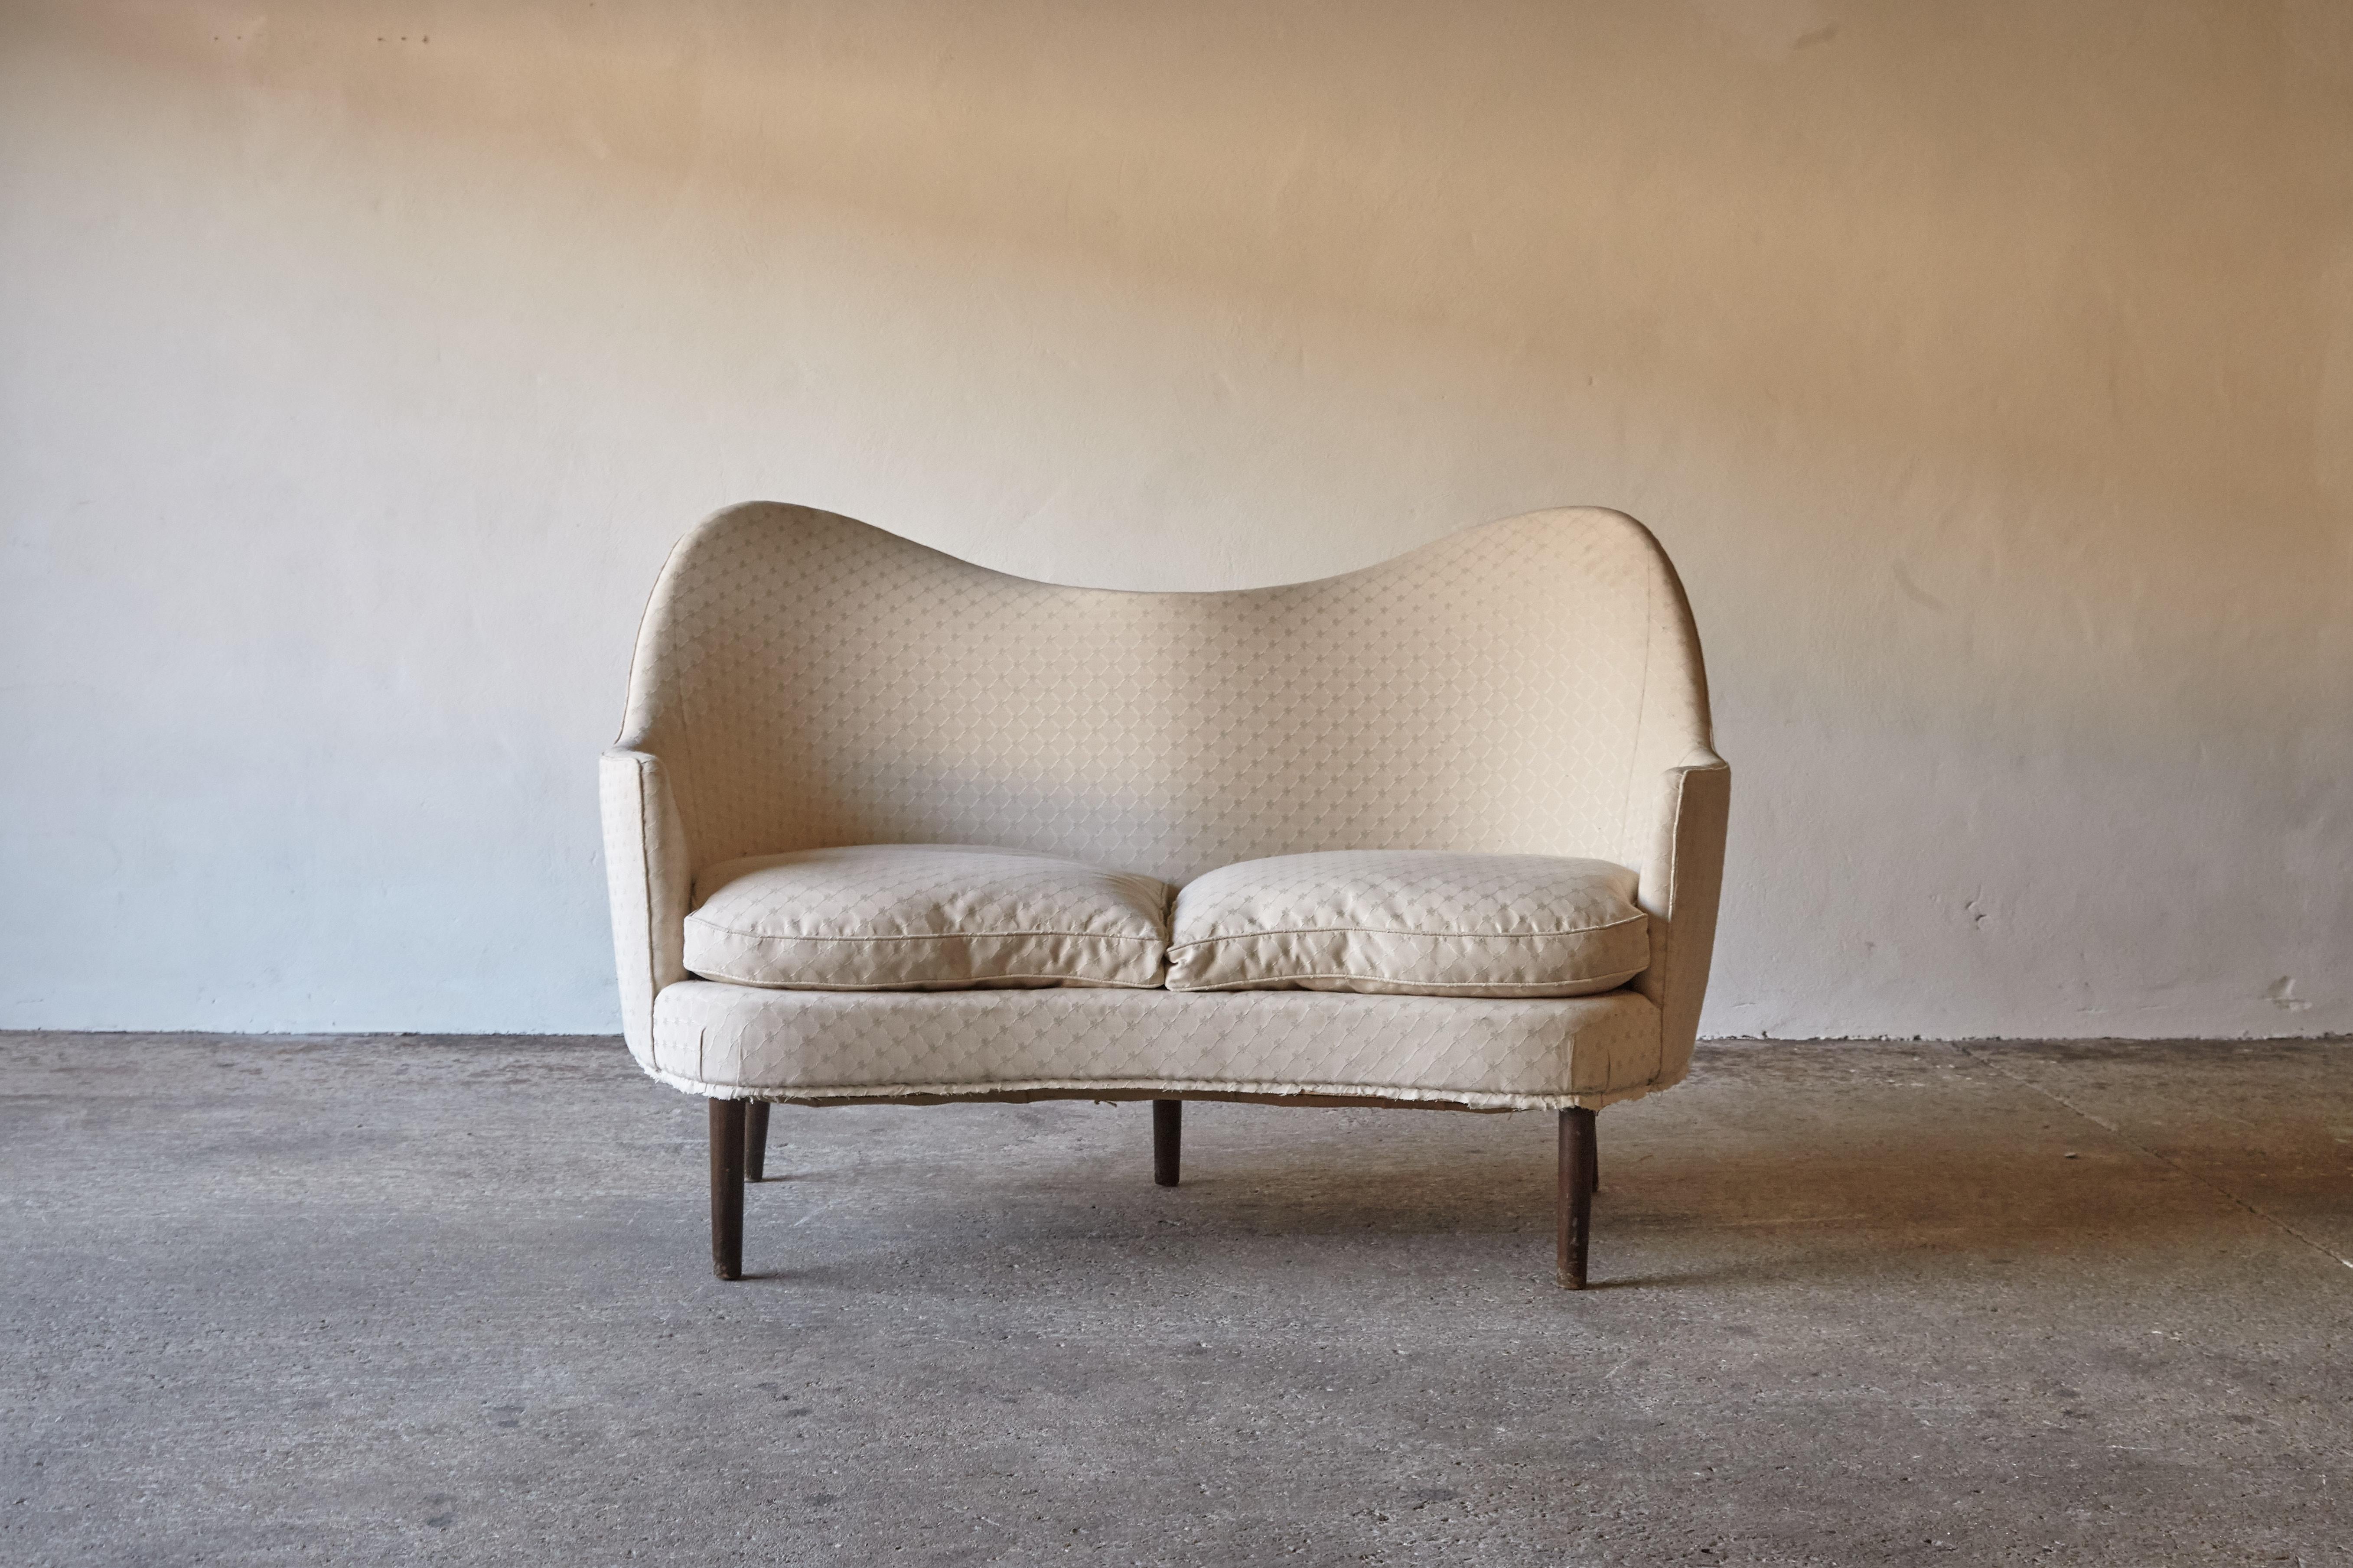 1950s 2 person love seat sofa from Denmark. Amazing curves. Similar in style to Finn Juhl's designs from the same era. In original condition with spring base and feather cushions.

We offer a re-upholstery service for this item.

Measures: